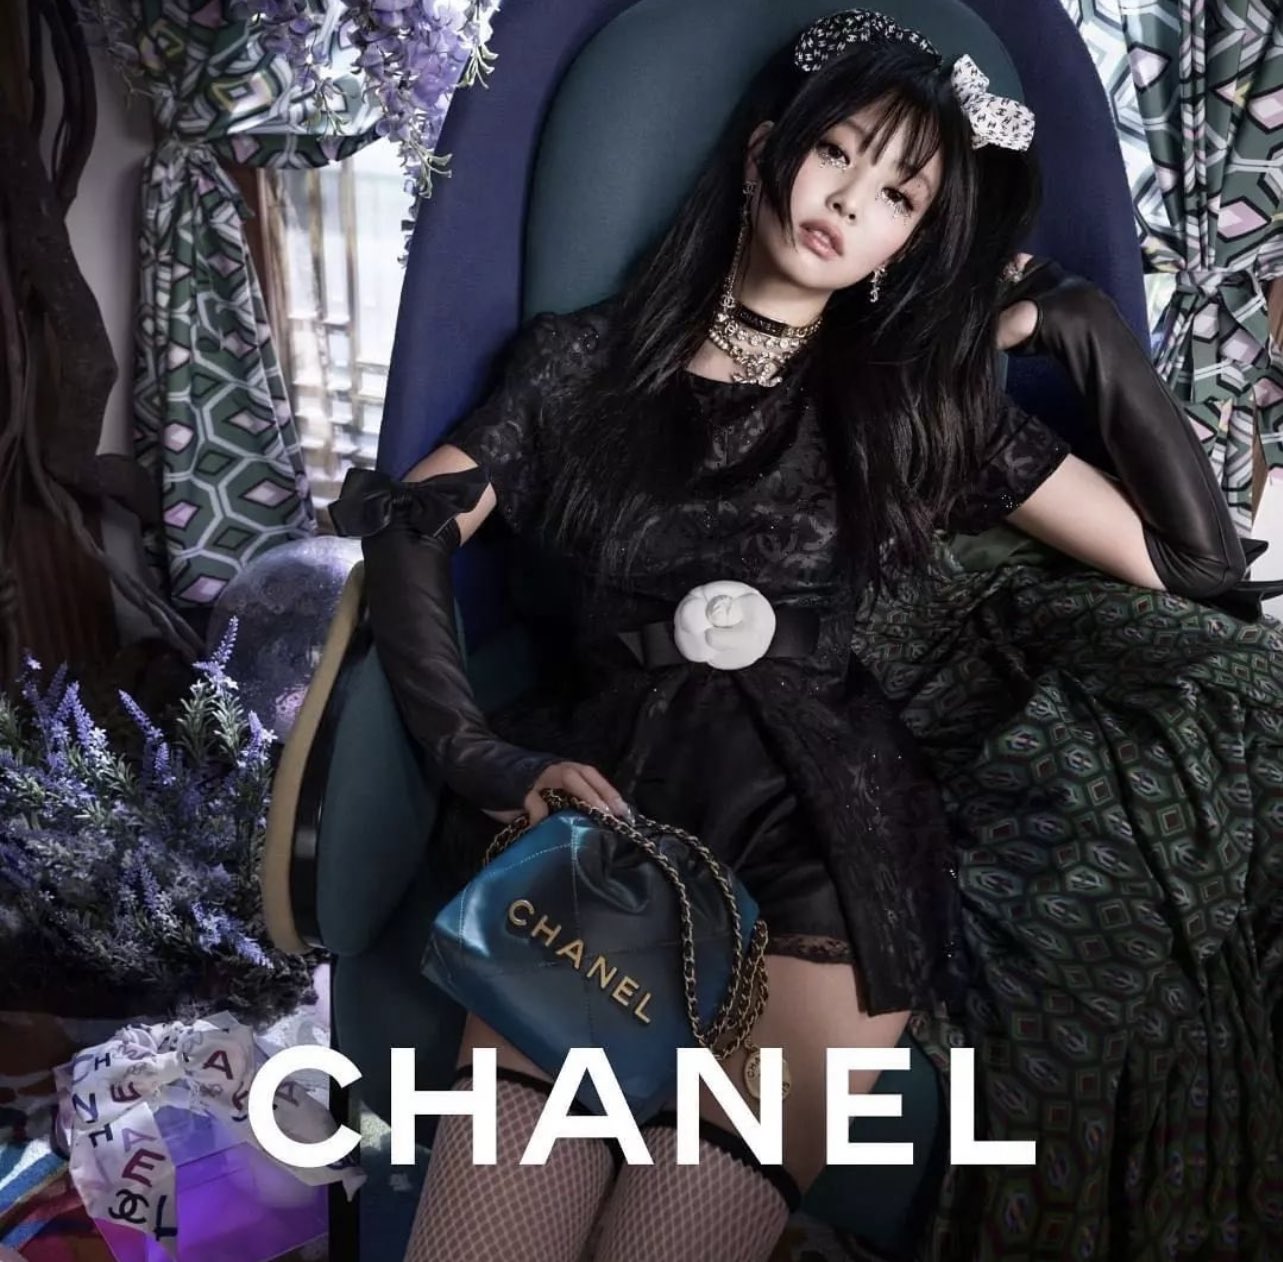 Hunter on X: jennie from blackpink for the new chanel 22 bag ad campaign   / X